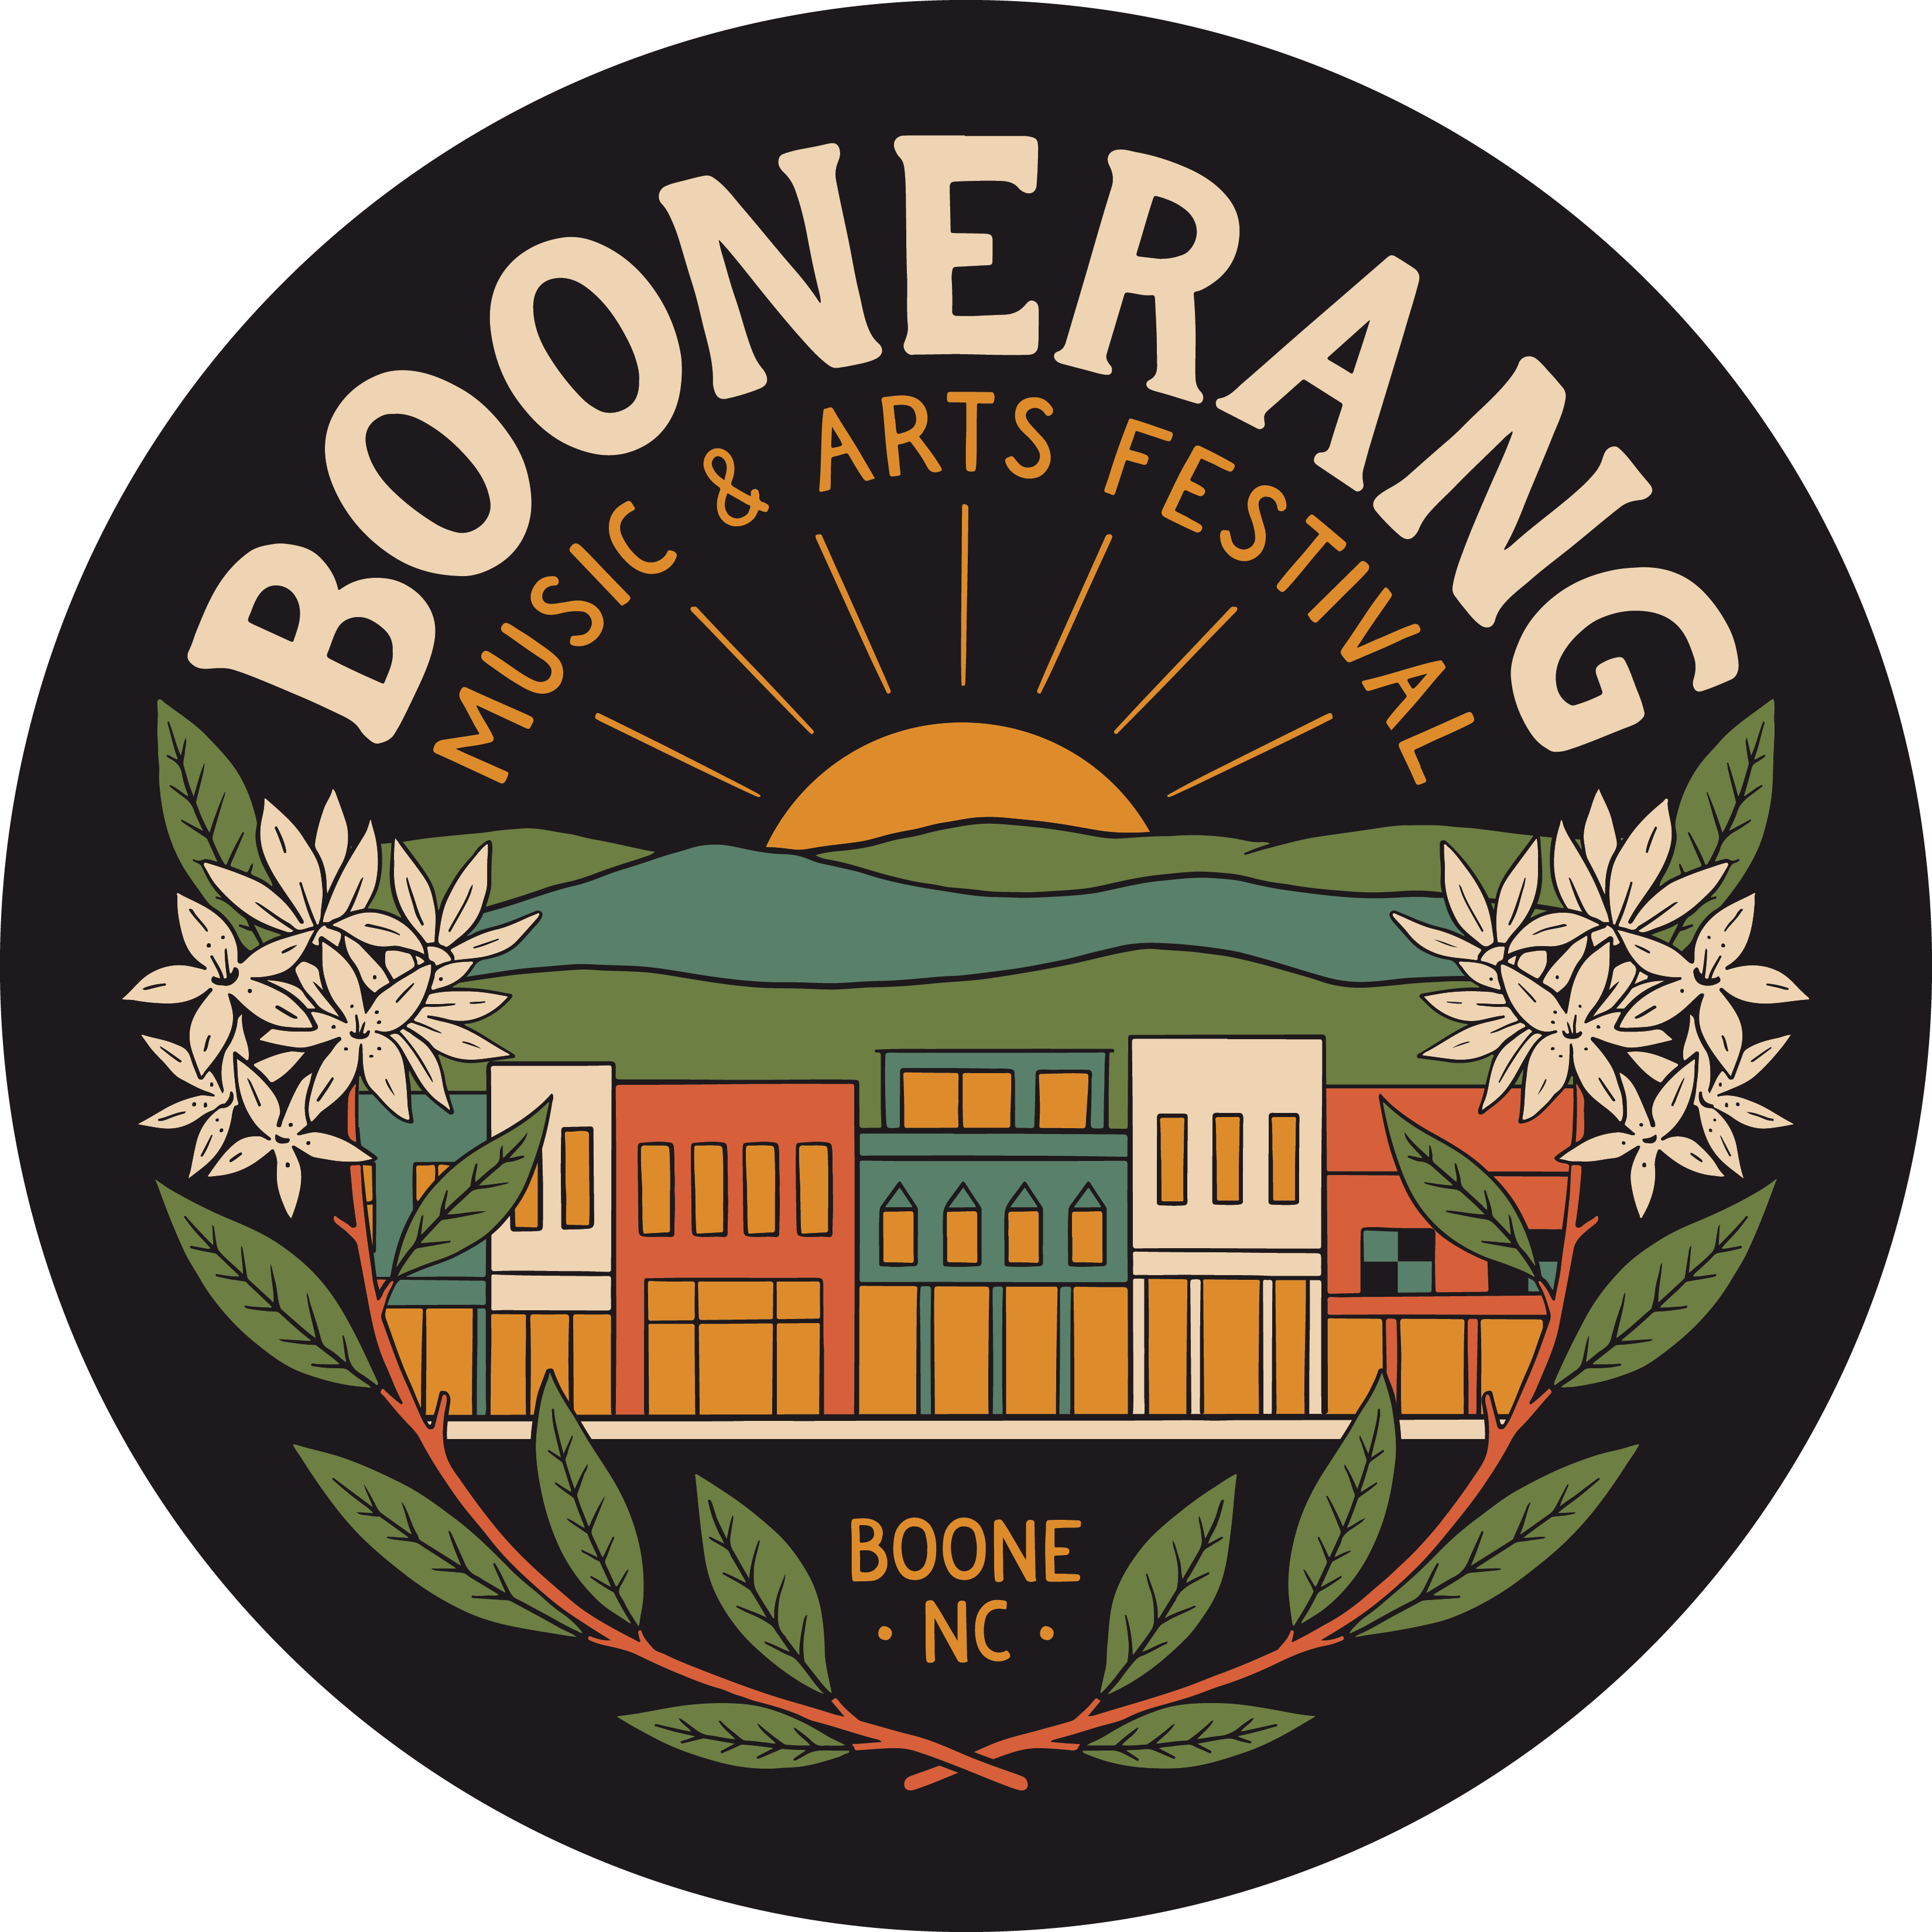 Boonerang Kick-Off Event to Feature “Boone’s Got Talent” Show at Appalachian Theatre